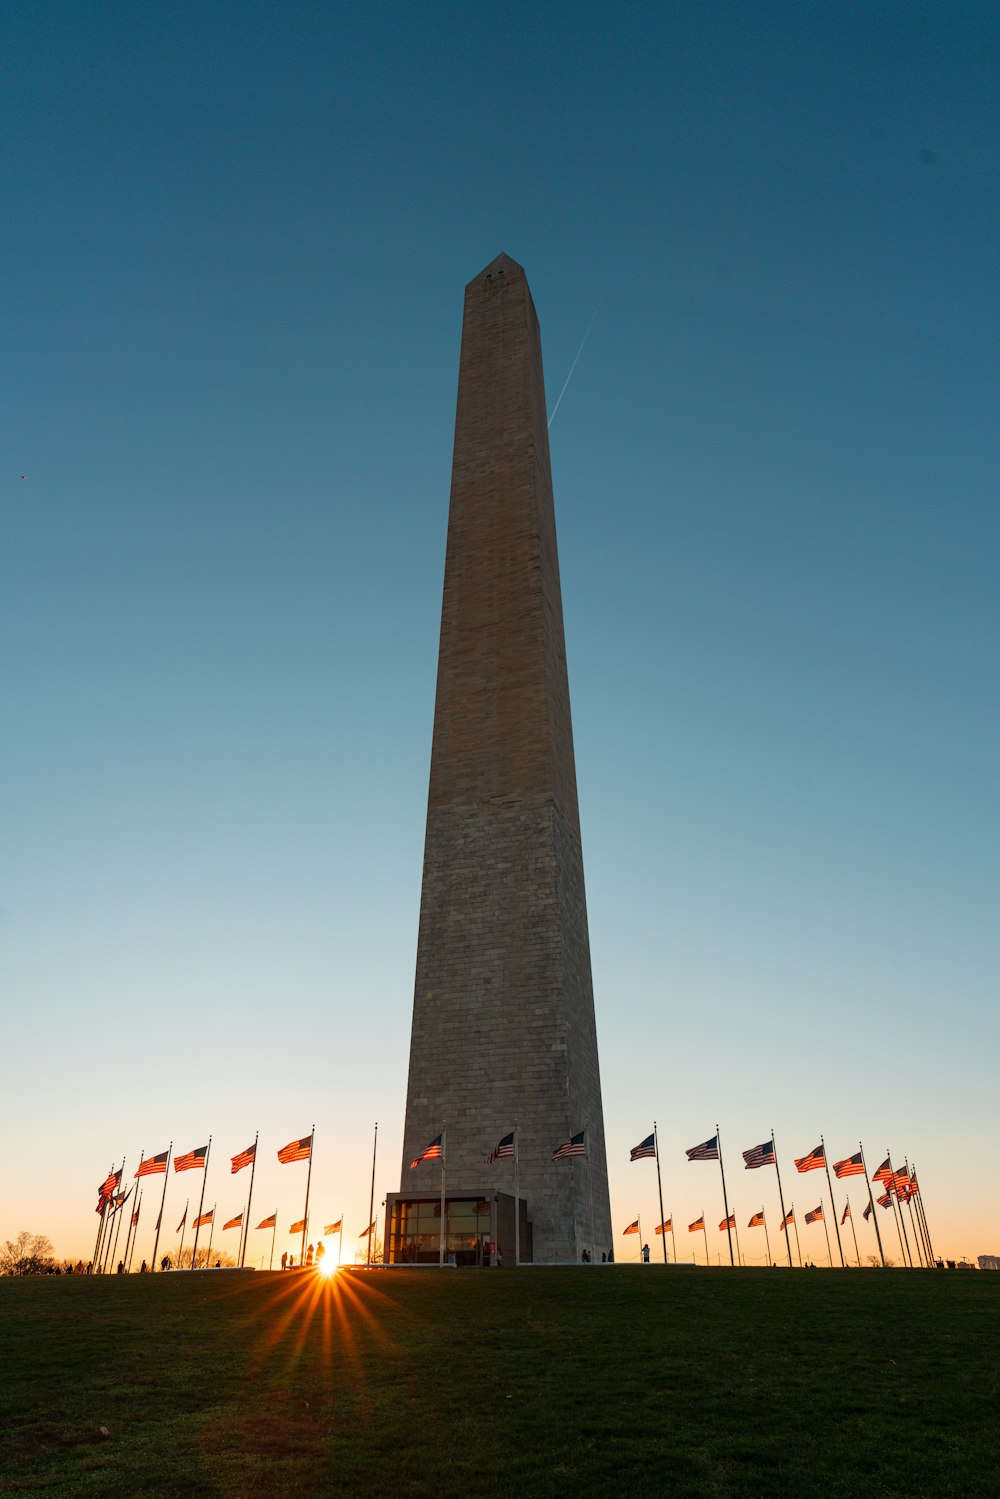 a tall monument with flags around it with Washington Monument in the background